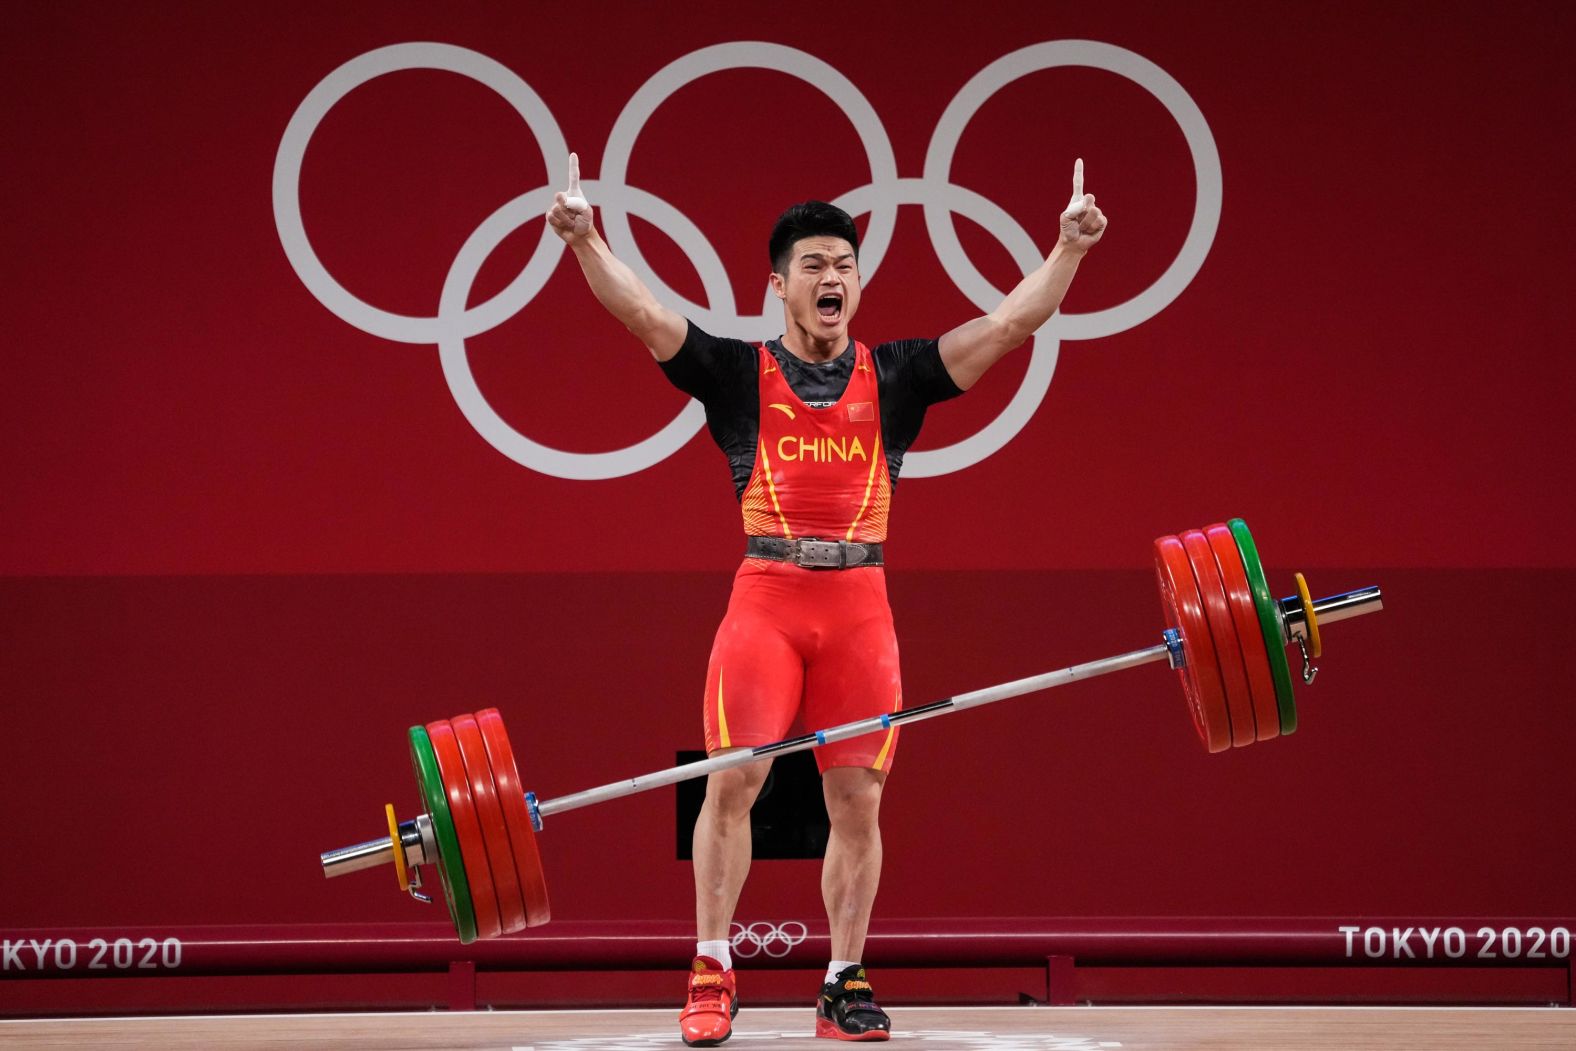 Chinese weightlifter Shi Zhiyong celebrates July 28 after winning gold in the 73-kilogram weight class. He lifted 166 kilograms in the snatch and 198 kilograms in the clean-and-jerk, setting <a href="index.php?page=&url=https%3A%2F%2Fwww.cnn.com%2Fworld%2Flive-news%2Ftokyo-2020-olympics-07-28-21-spt%2Fh_377e9649c19957df713a660d039f1d4e" target="_blank">a new world record total of 364 kilograms.</a>